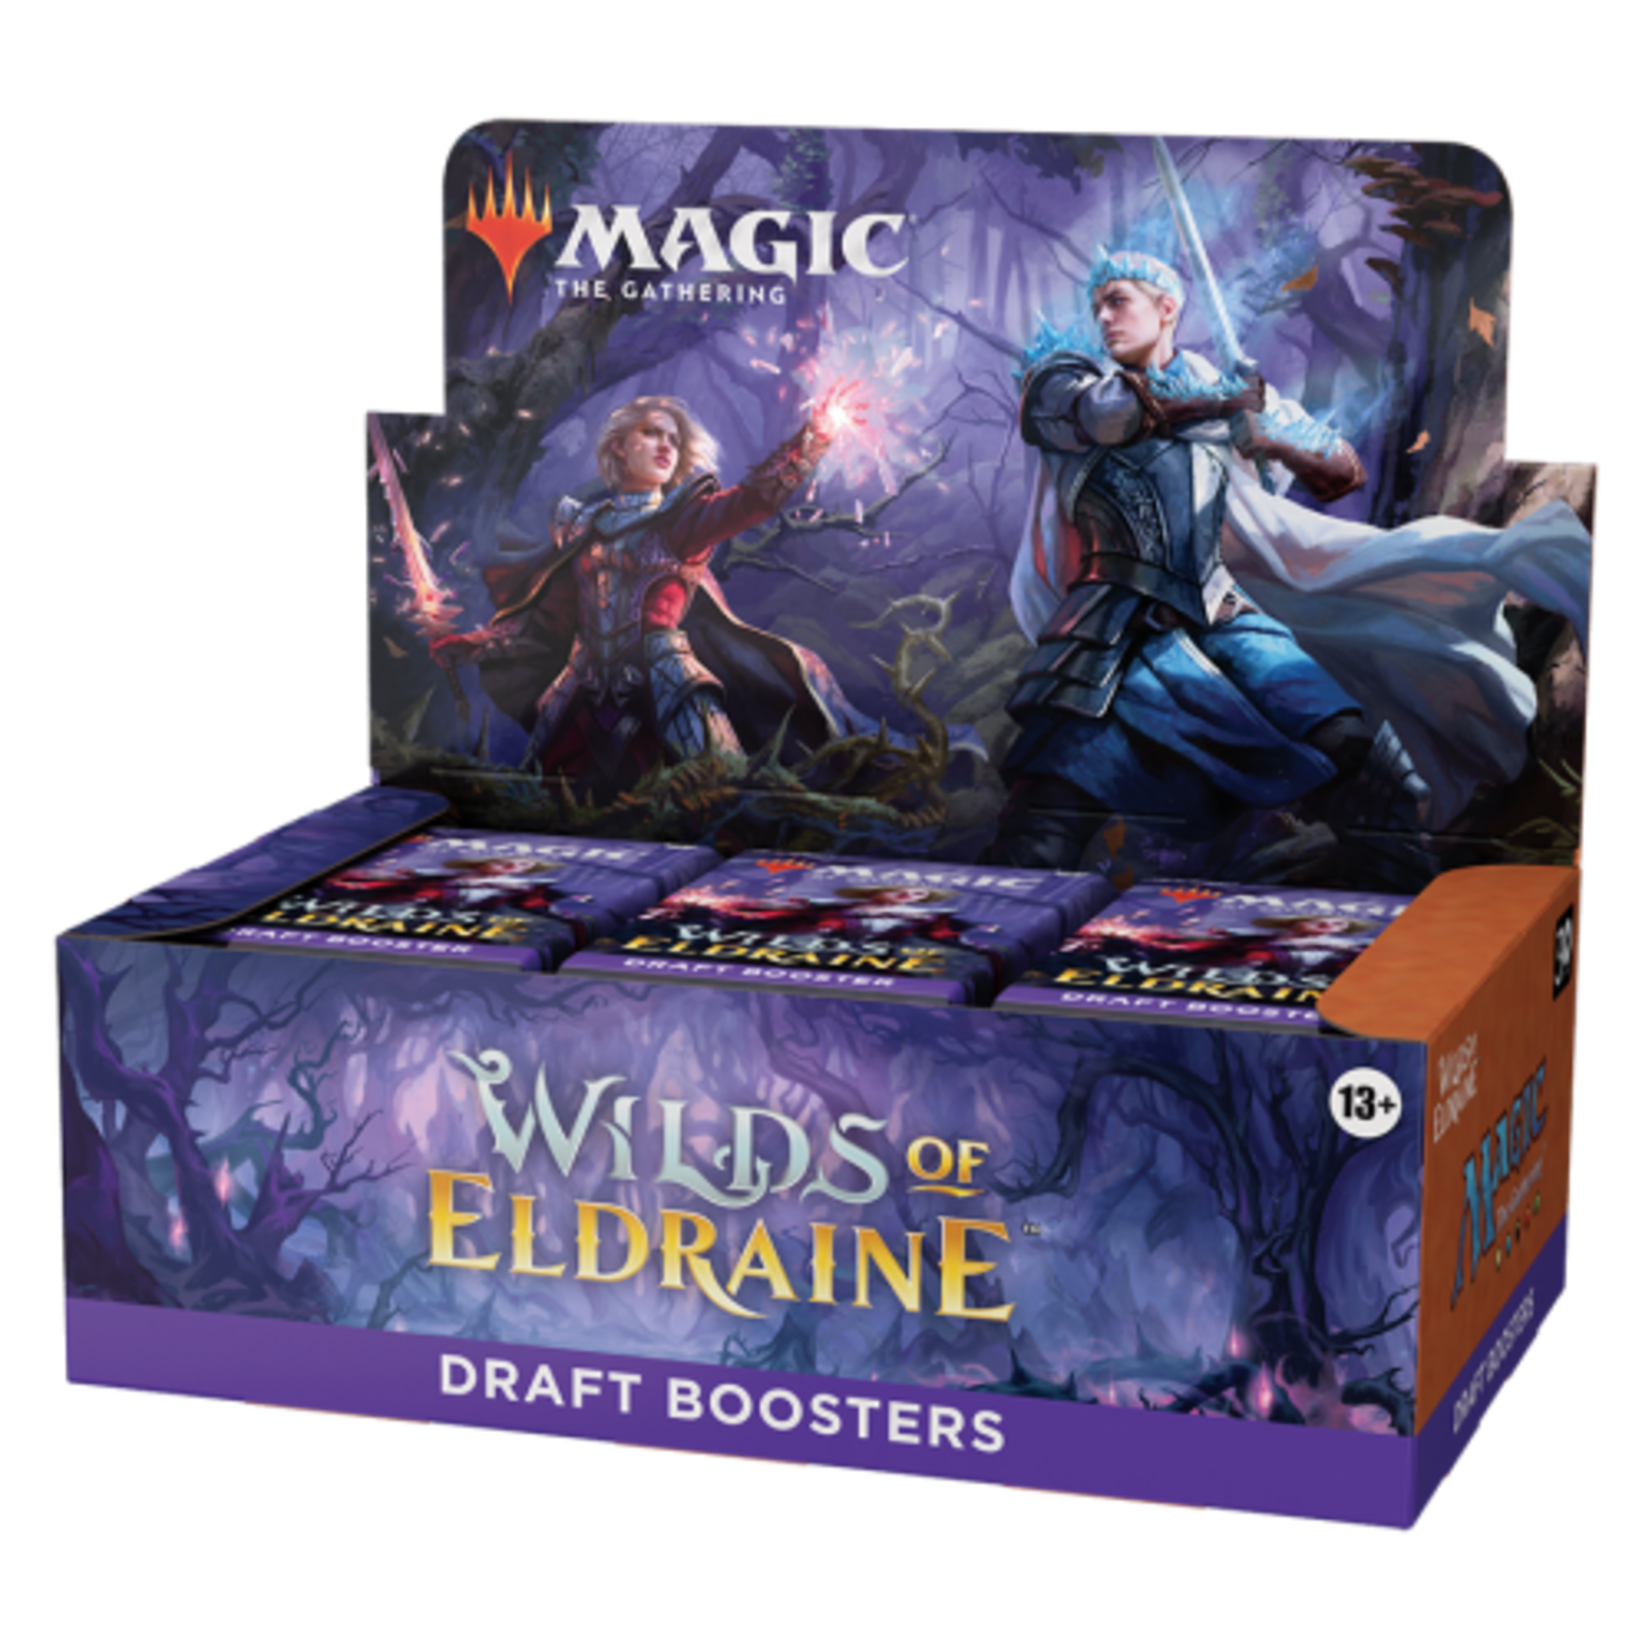 Magic the gathering Wilds of eldraine: draft Booster box